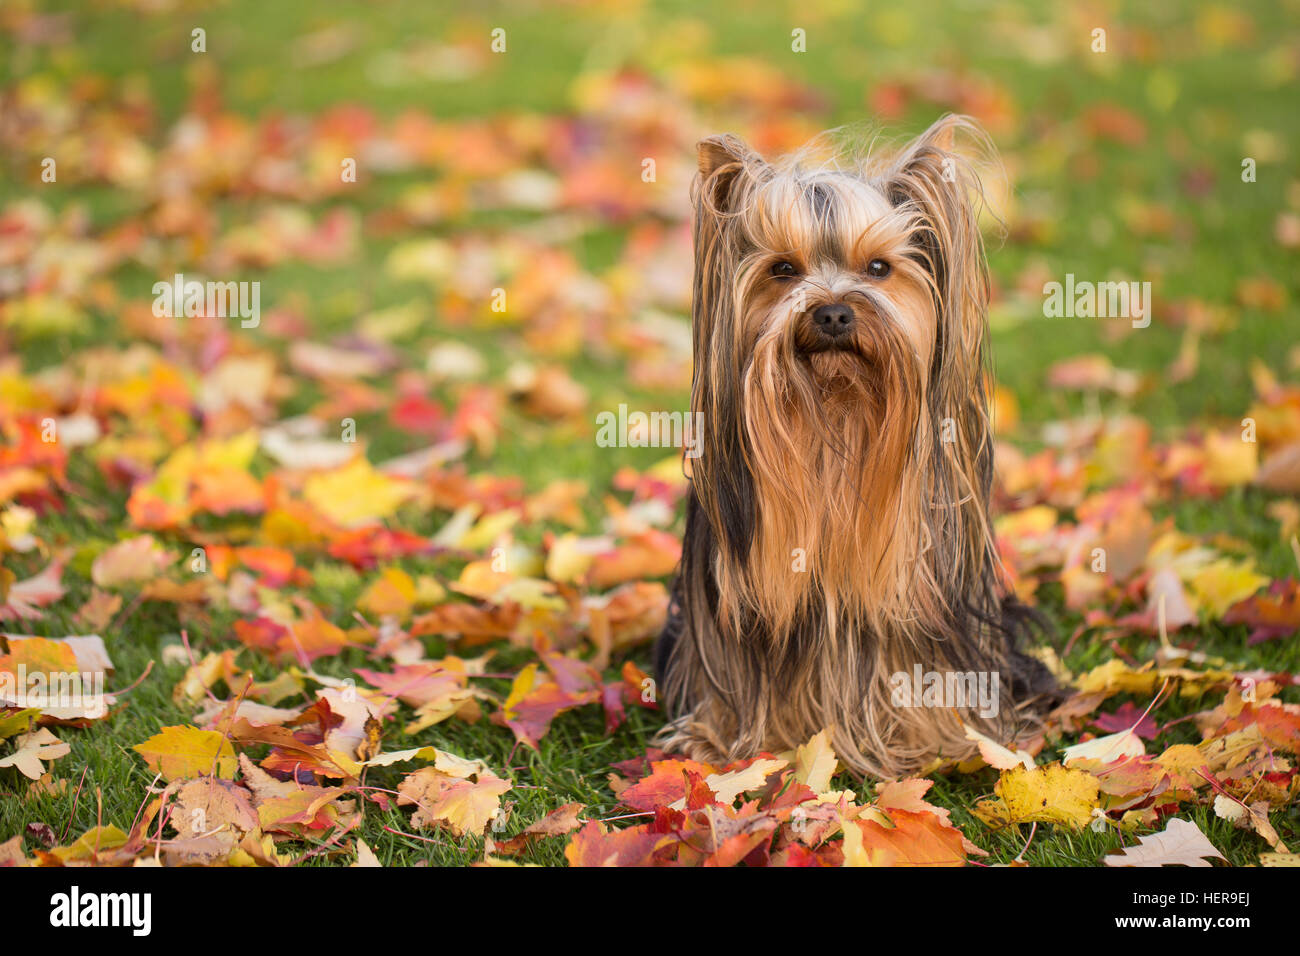 1 animal,animal,autumn,autumn foliage,color,colorful,copyspace,cute,dog,expression,fall,foliage,garden,grass,happiness,leaves,little,look,miniature long haired yorkie,Mini Yorkshire Terrier,nature,october,orange,pedigree,pet,portrait,portrait of Yorkshire Stock Photo